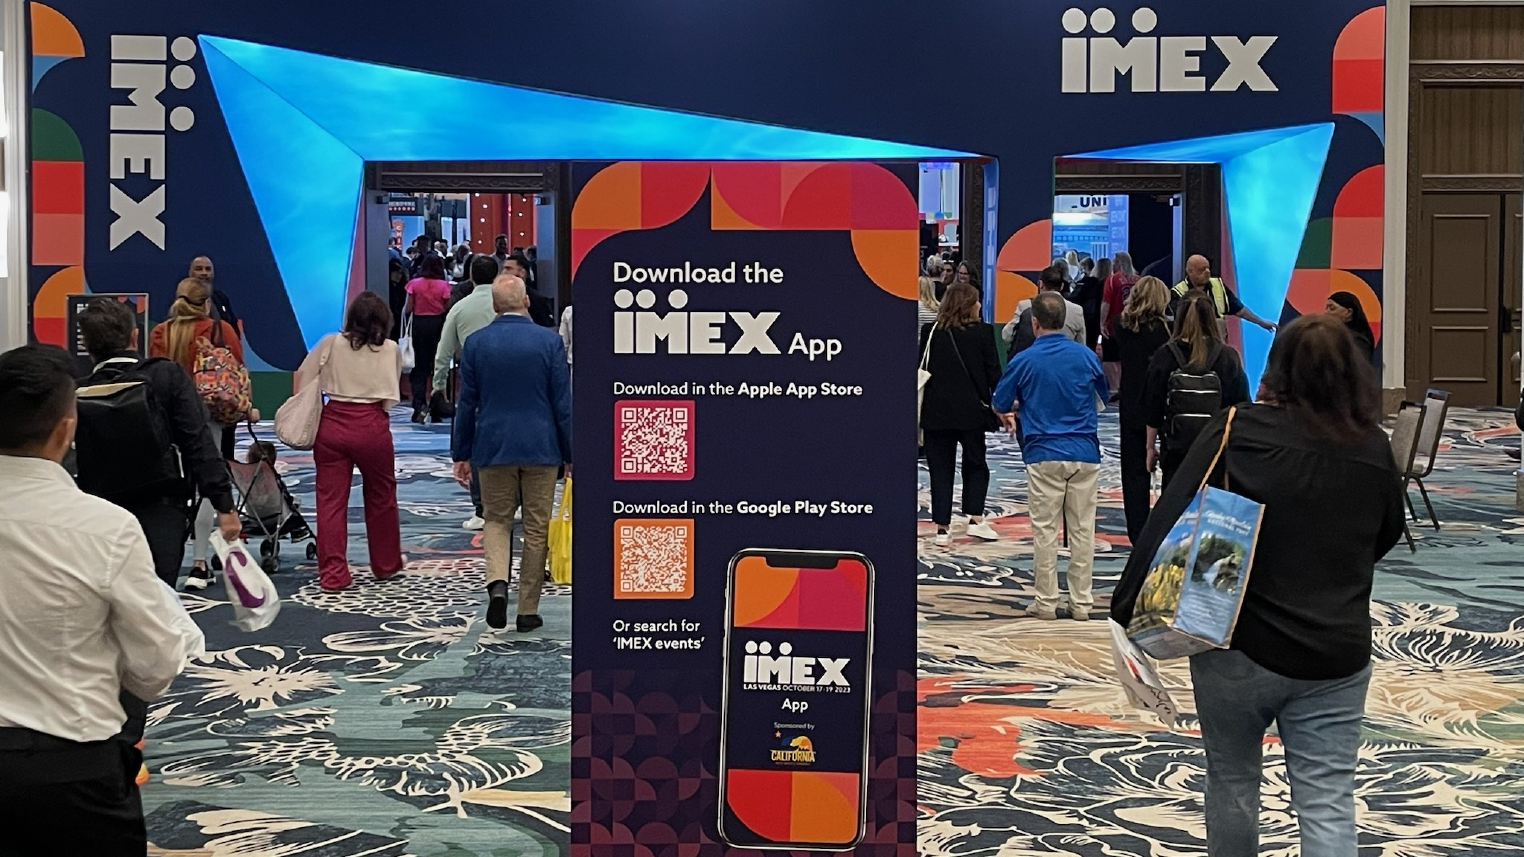 ExpoPlatform and Crowd Connected Ignite IMEX App Experience